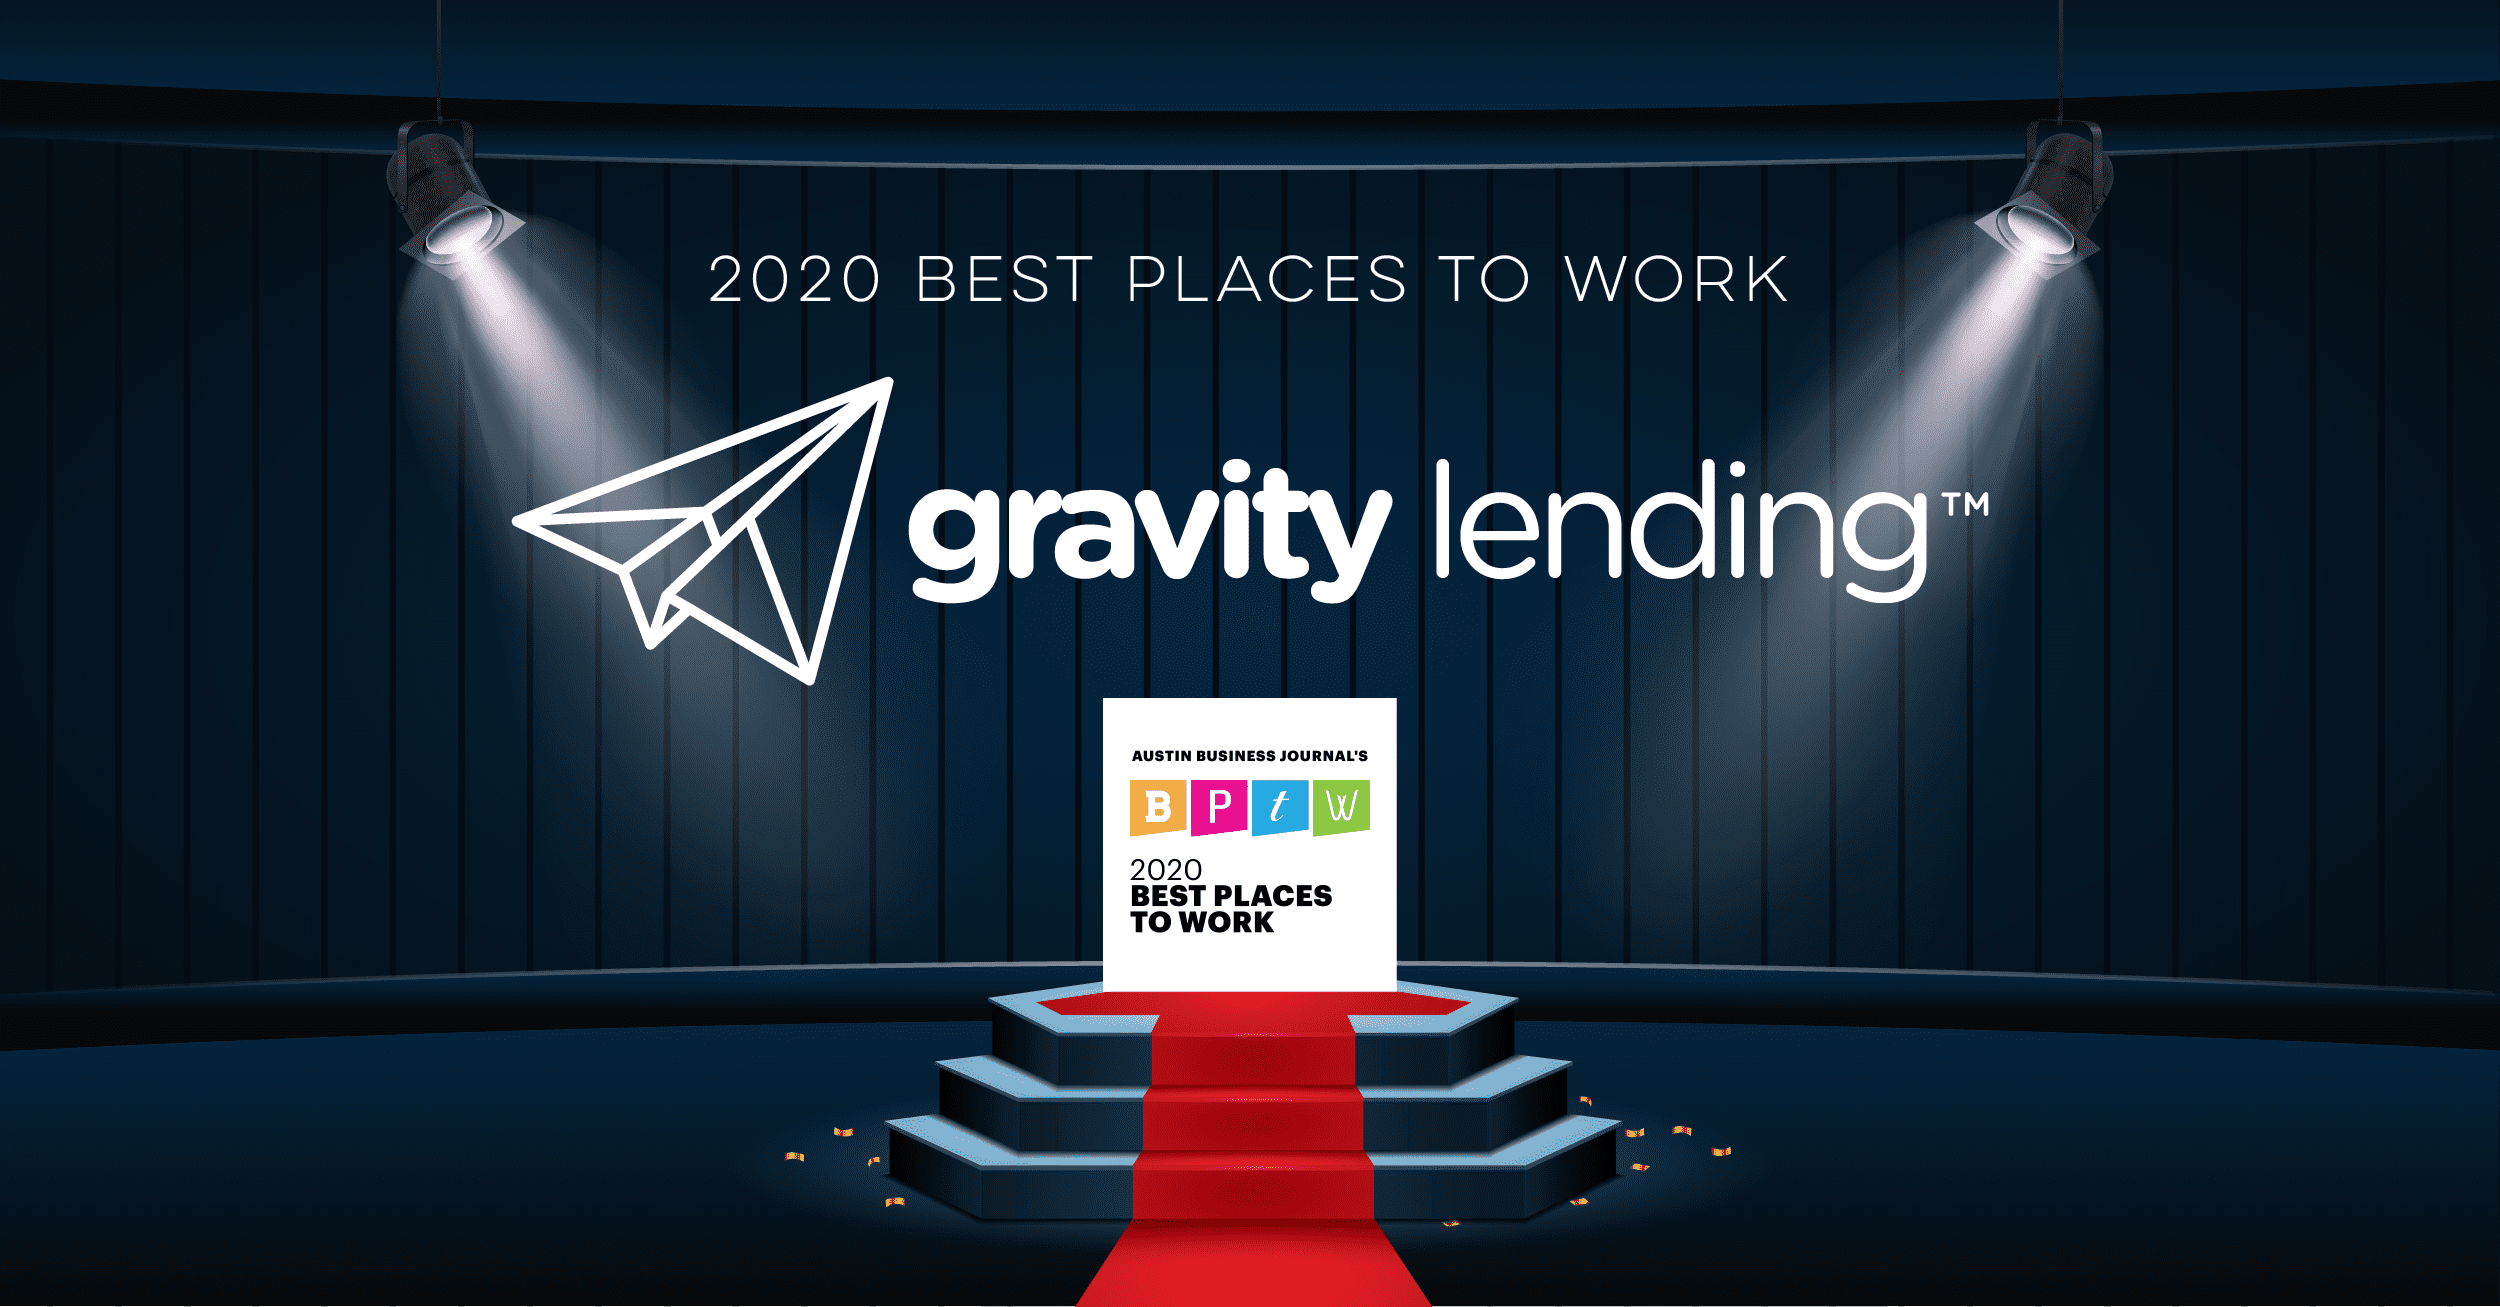 Image describing Gravity Lending as a 2020 Best Places to Work Winner.